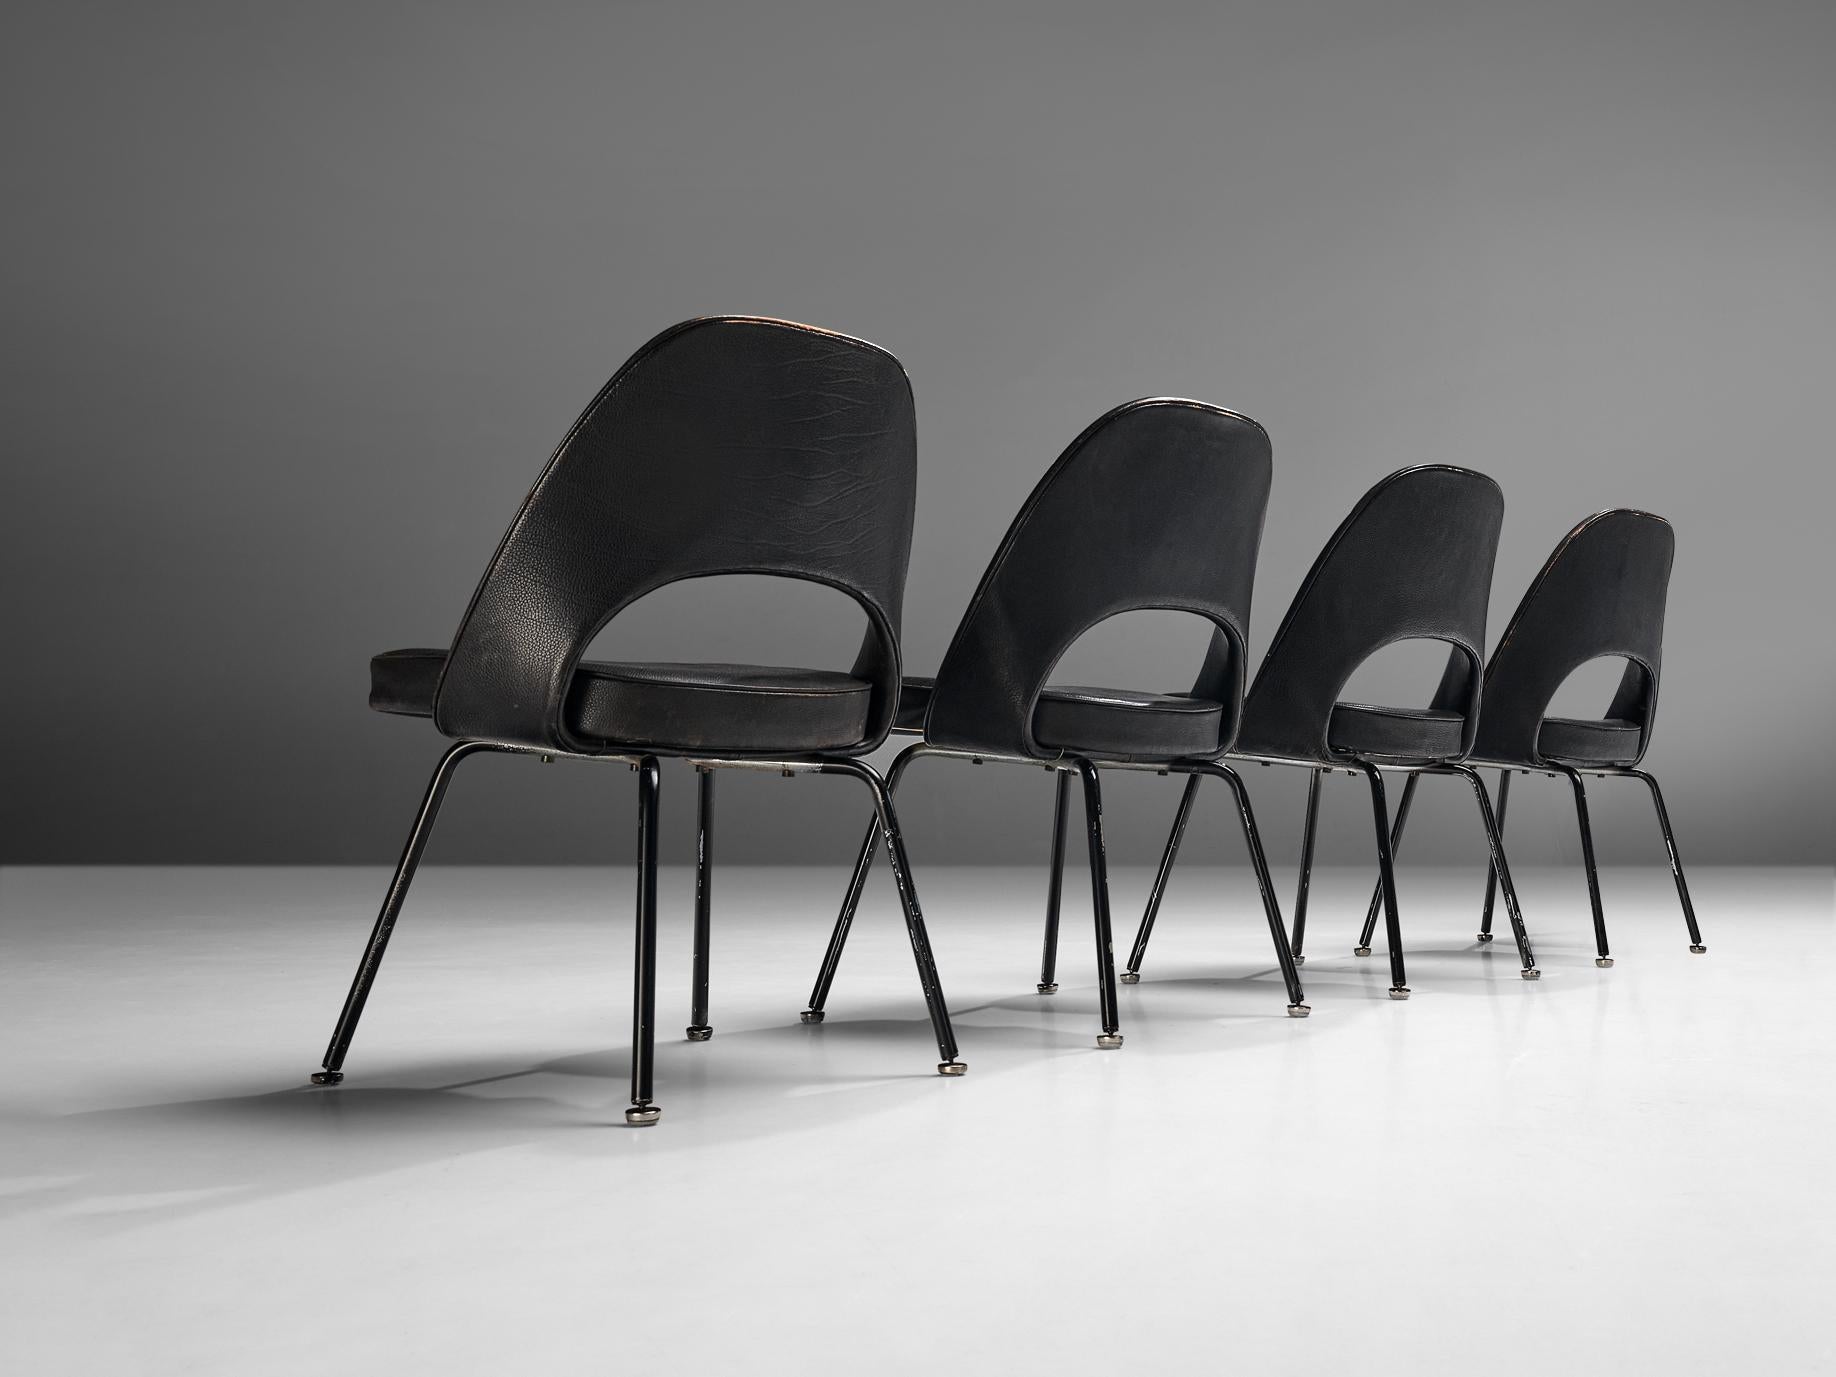 Eero Saarinen for Knoll International, set of four model 72 chairs, in chrome and leather fabric, United States, 1948. 

Set of four organic shaped chairs designed by Eero Saarinen. A fluid, sculptural form. This timeless and versatile design